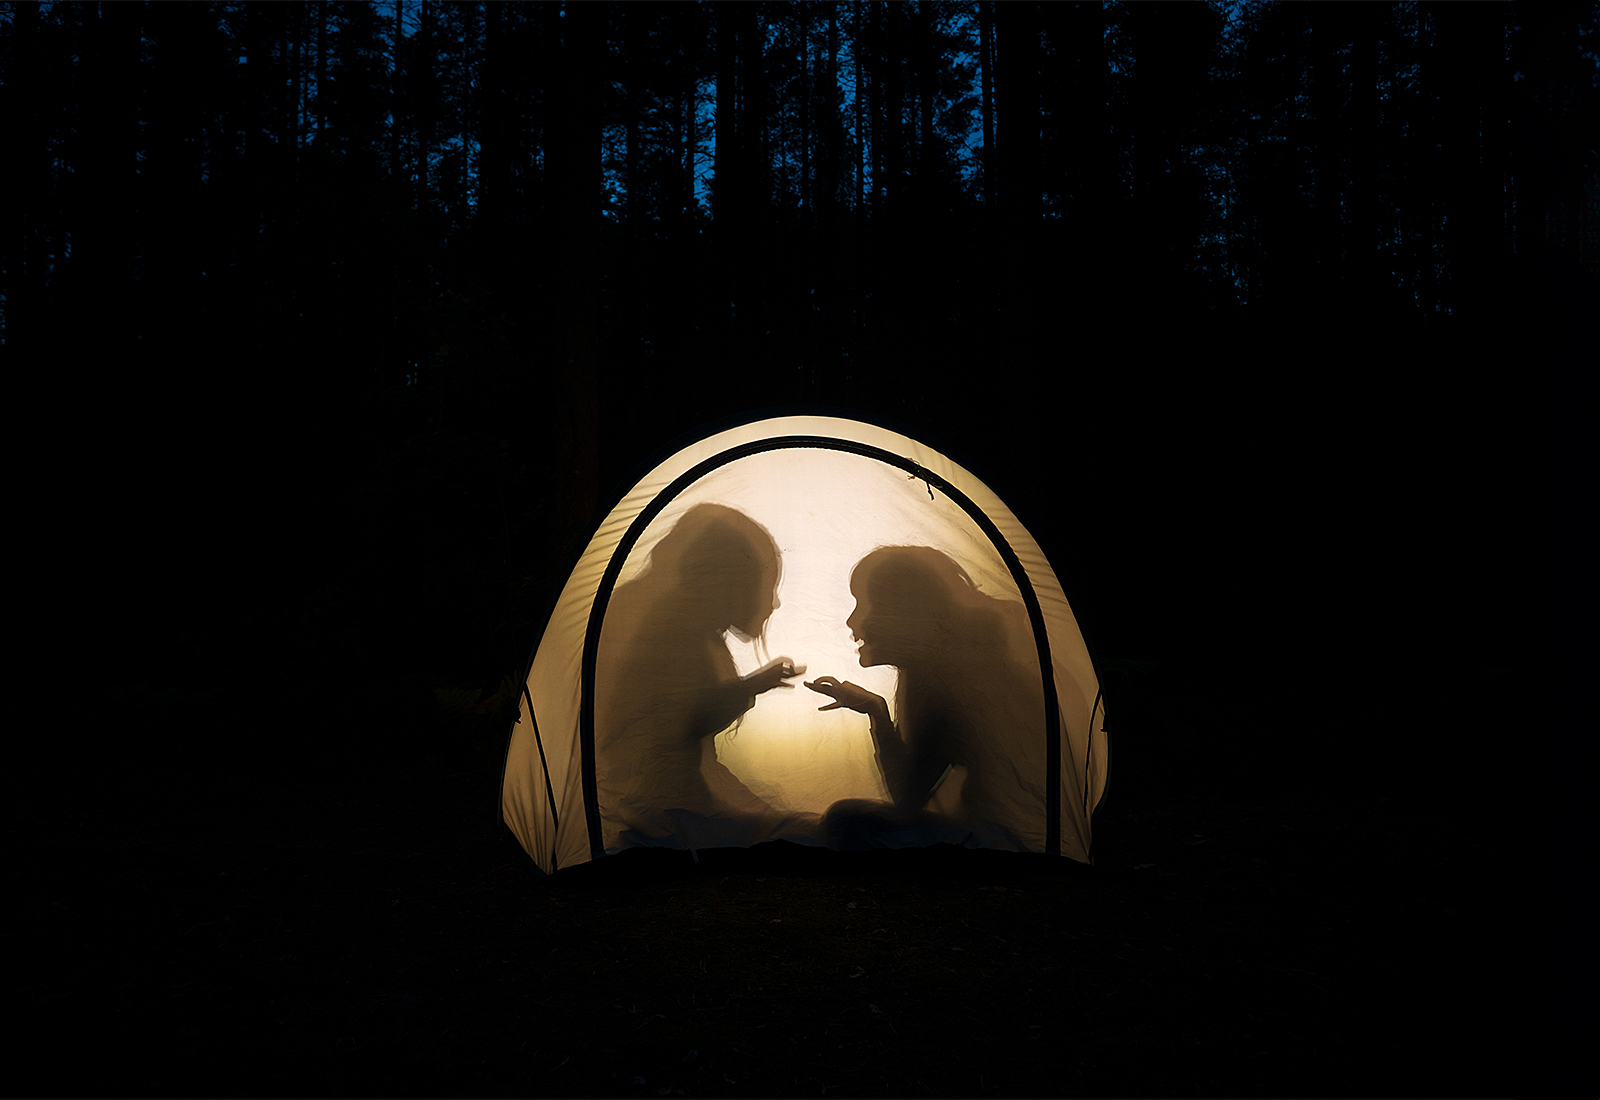 Children telling scary stories in a tent at night